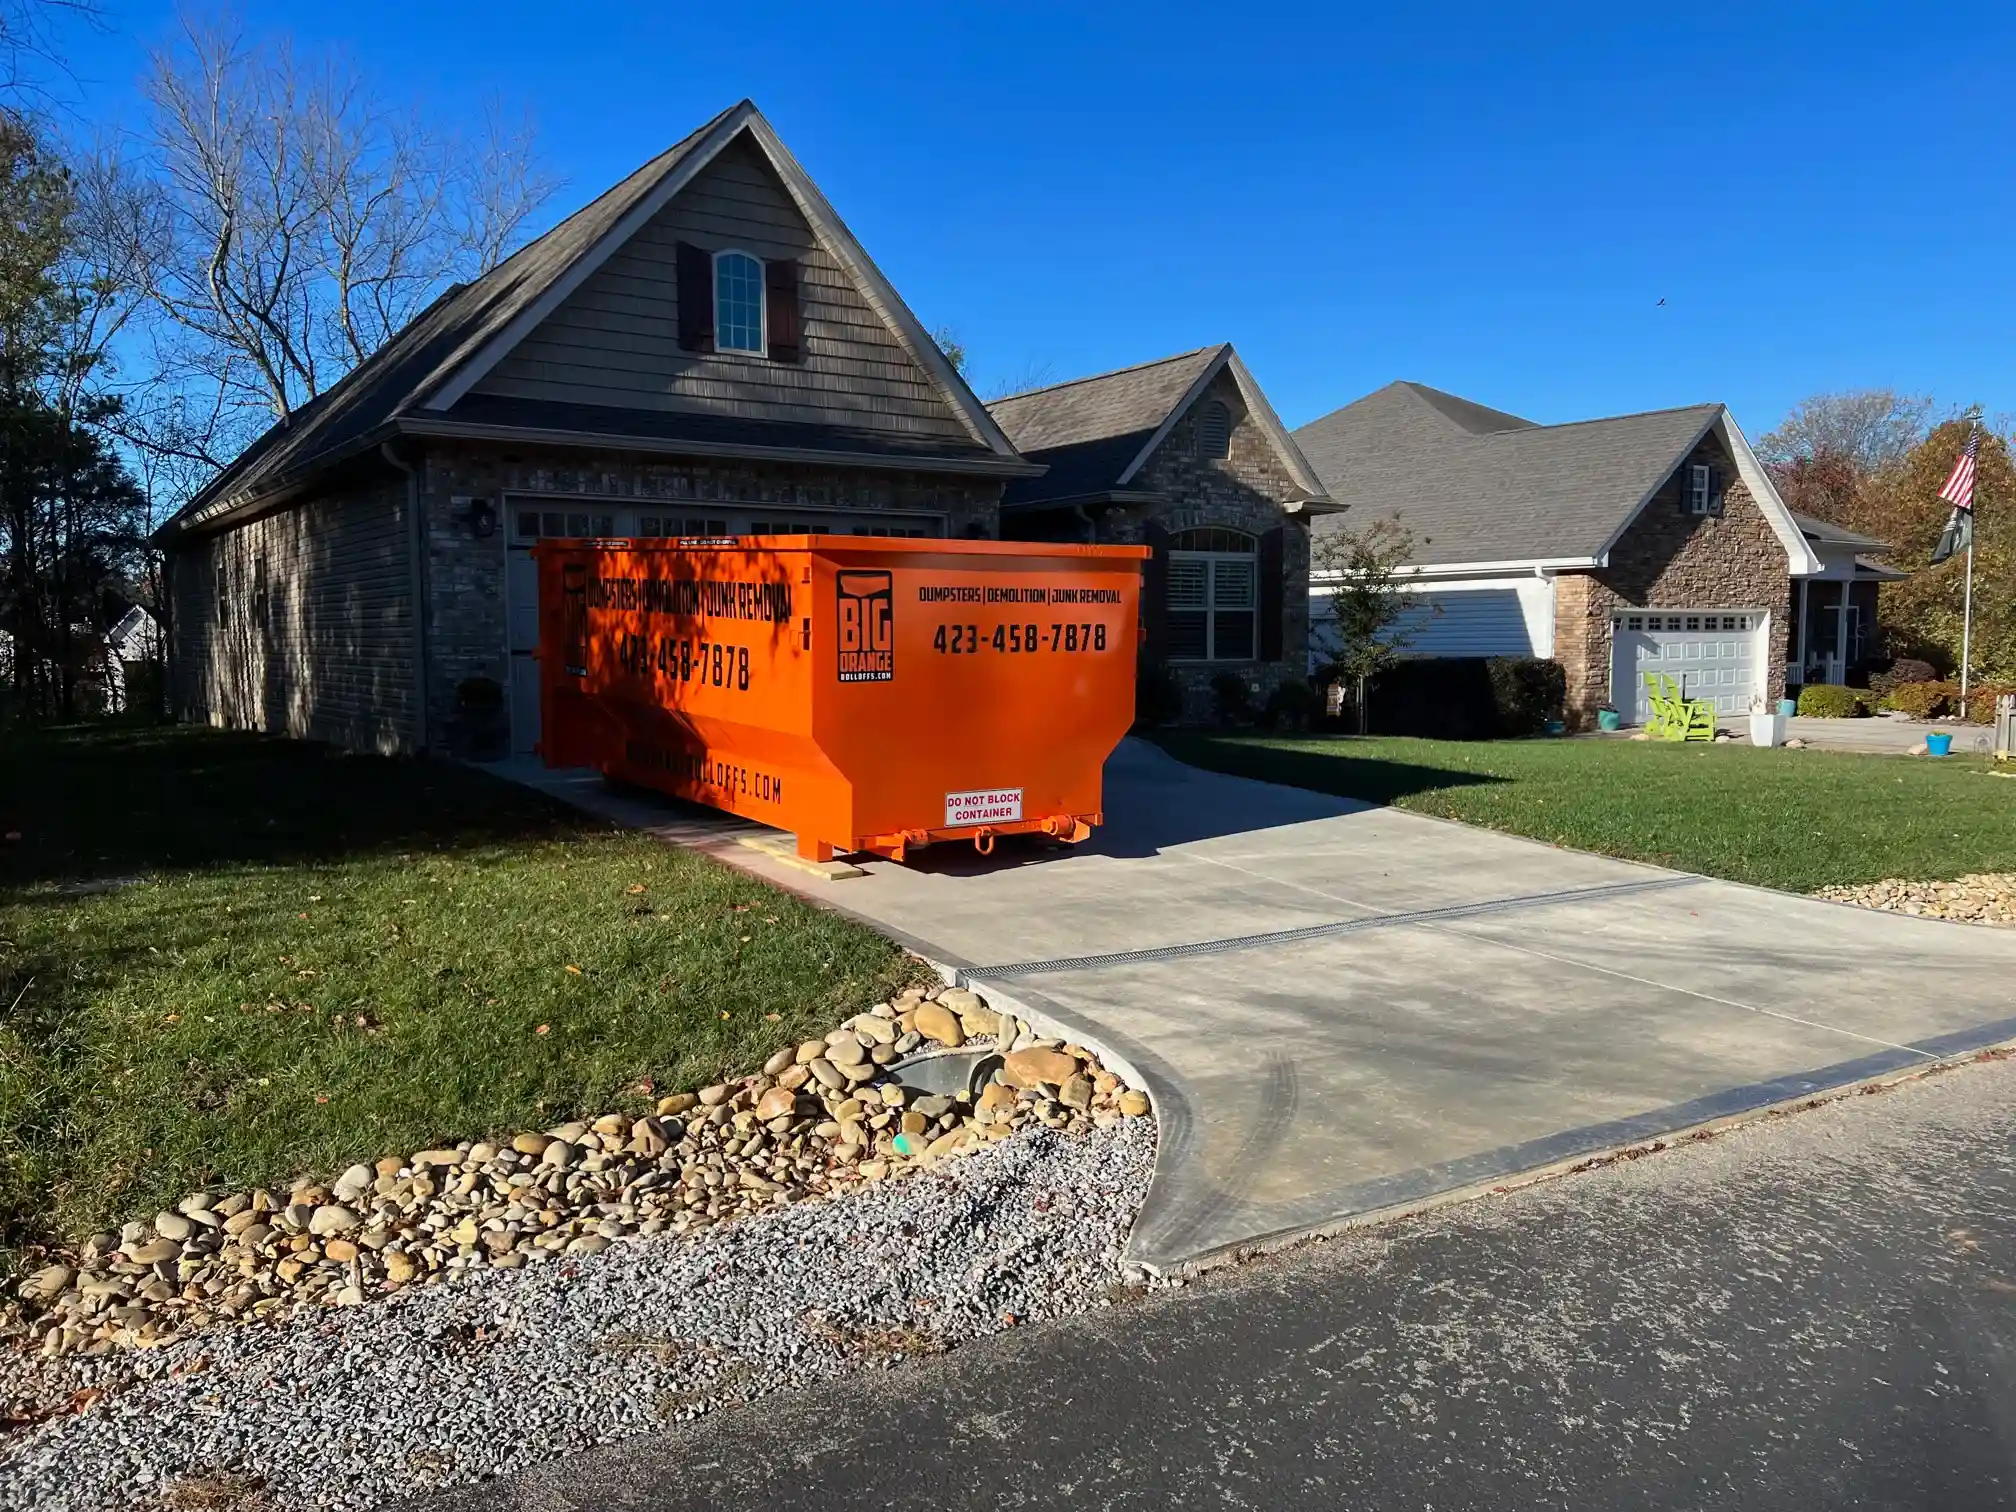 roll off dumpster in driveway